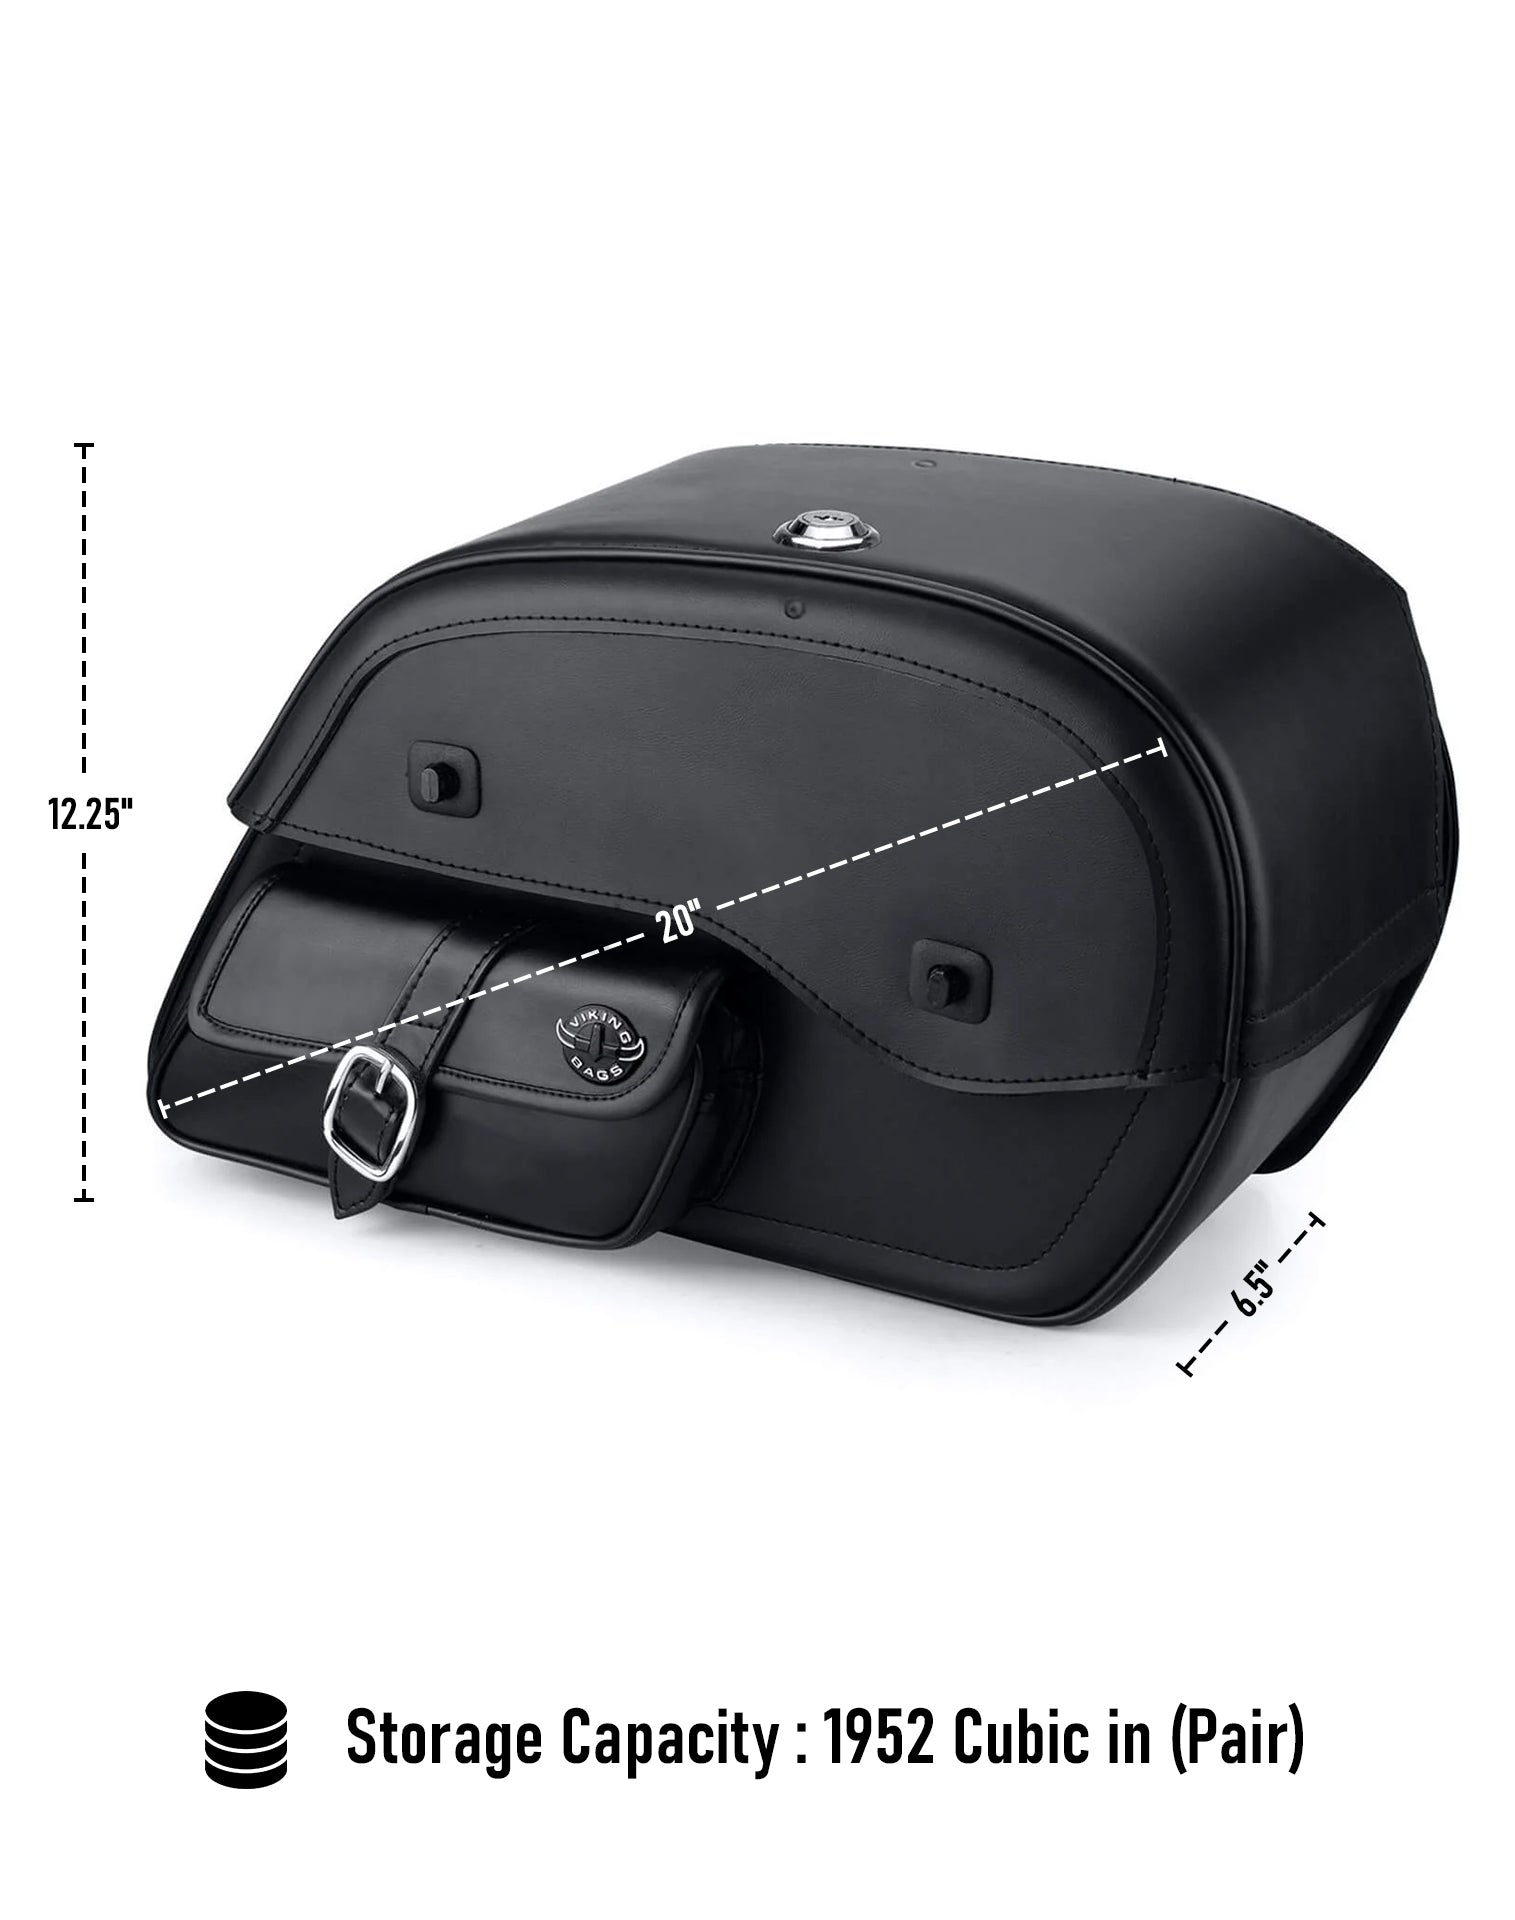 Viking Essential Side Pocket Large Suzuki Boulevard M90 Vz1500 Leather Motorcycle Saddlebags Can Store Your Ridings Gears